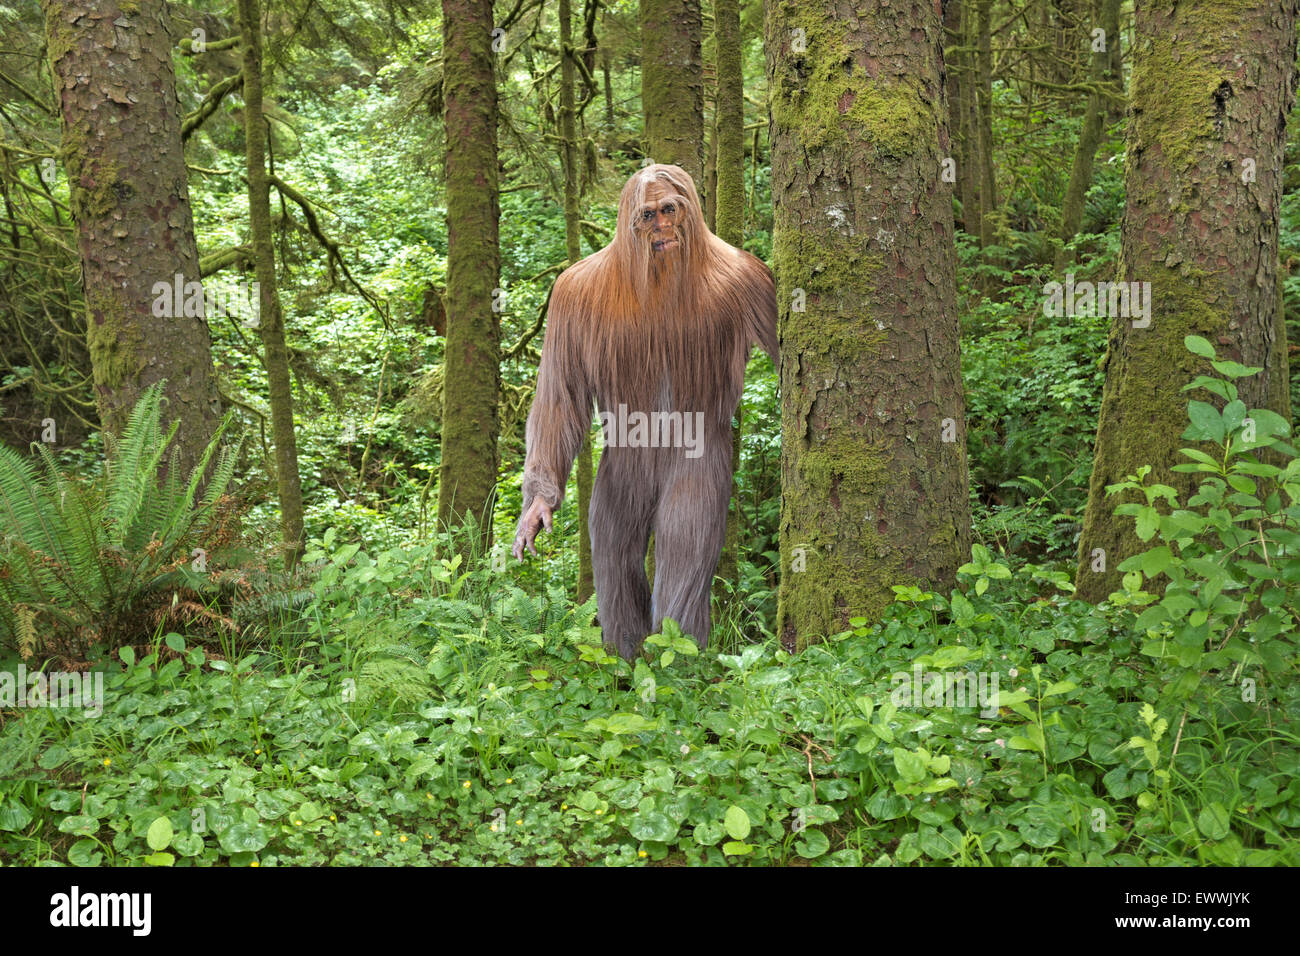 A portrait of Bigfoot, also known as Sasquatch, at home in a dense, temperate rain forest in the Pacific Northwest. Stock Photo